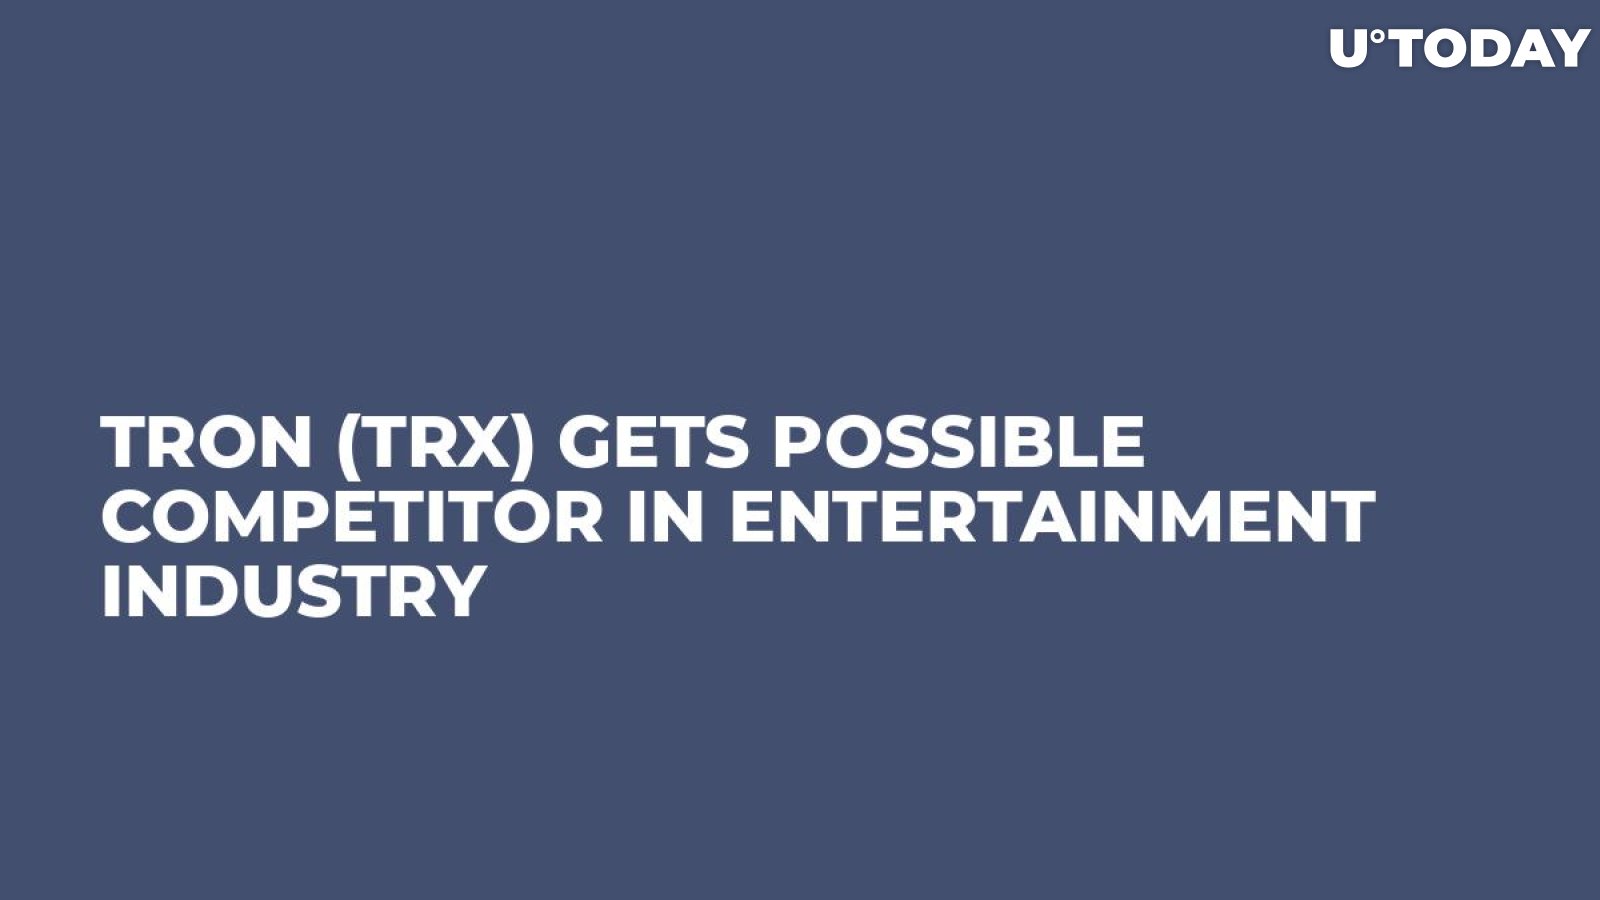 TRON (TRX) Gets Possible Competitor in Entertainment Industry